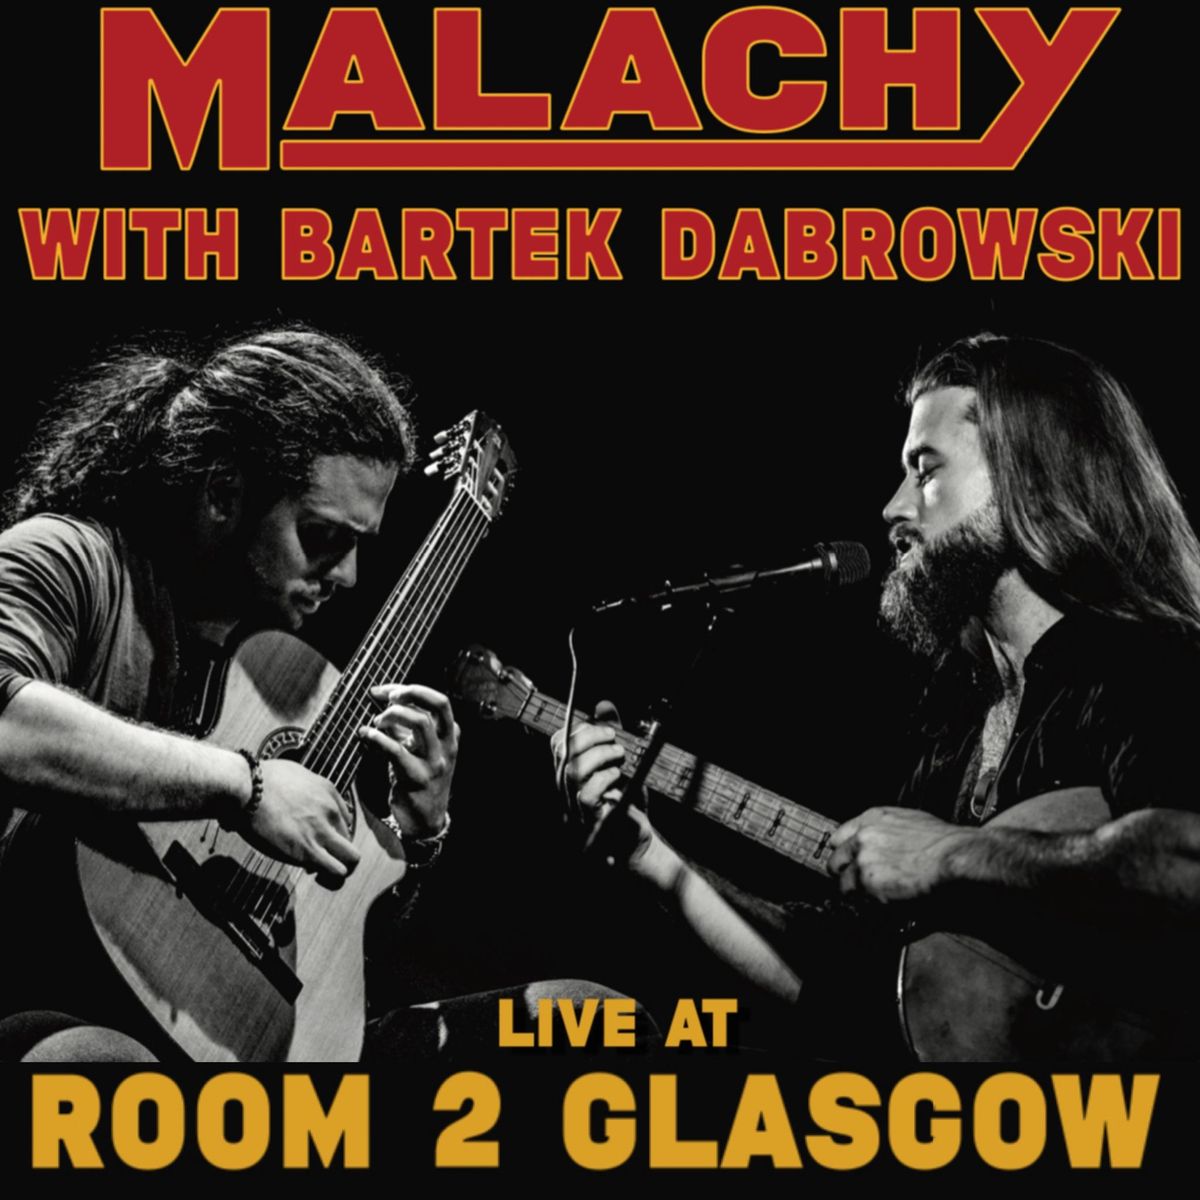 Malachy, with Bartek Dabrowski and friends live at Room 2 Glasgow